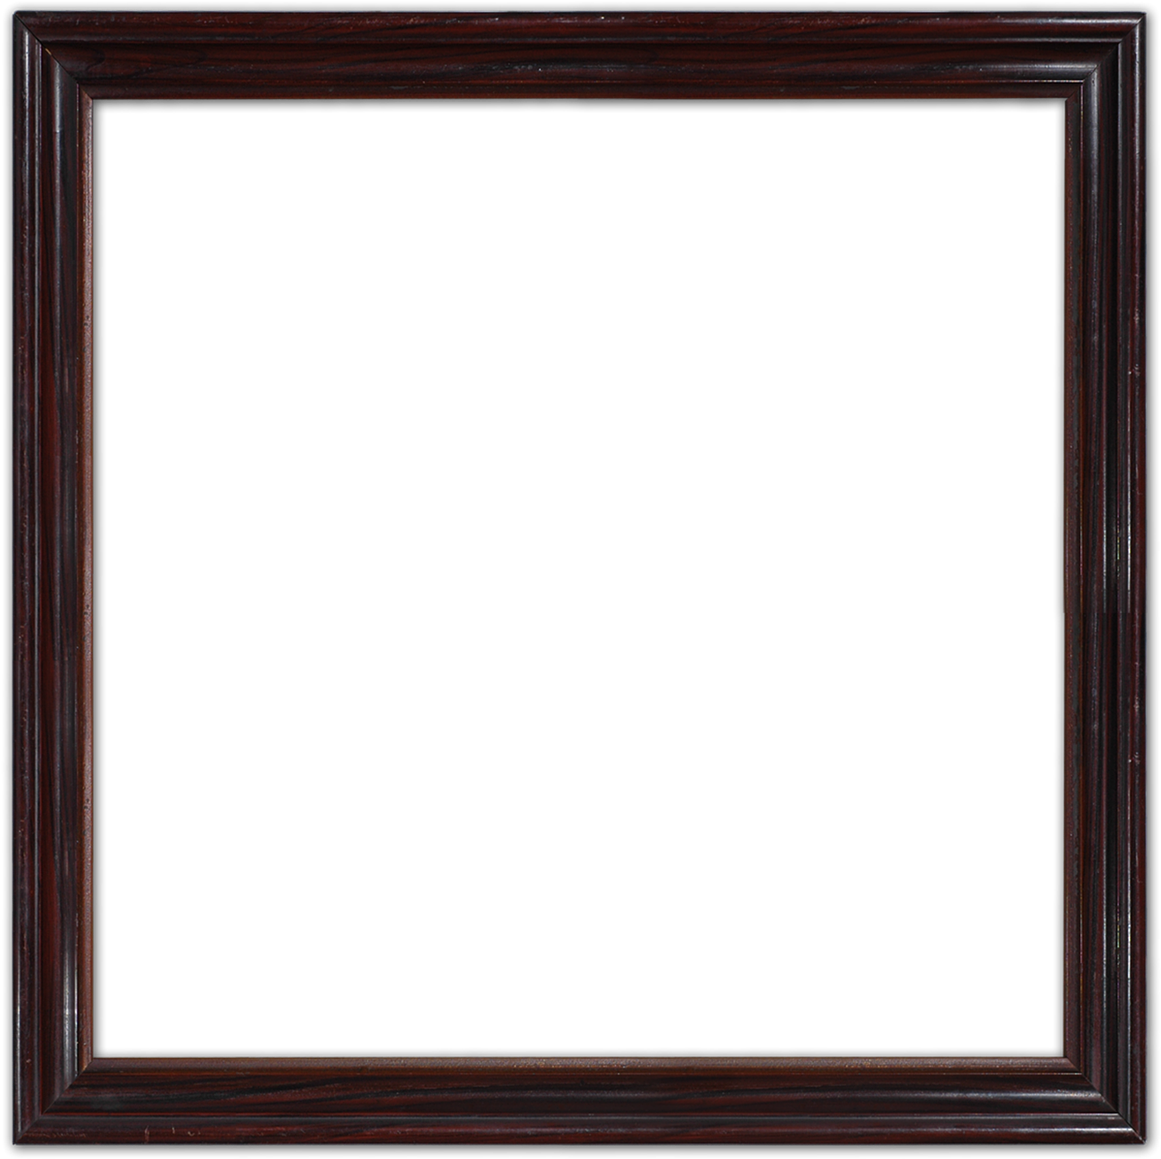 A Black Square Frame With A Black Background